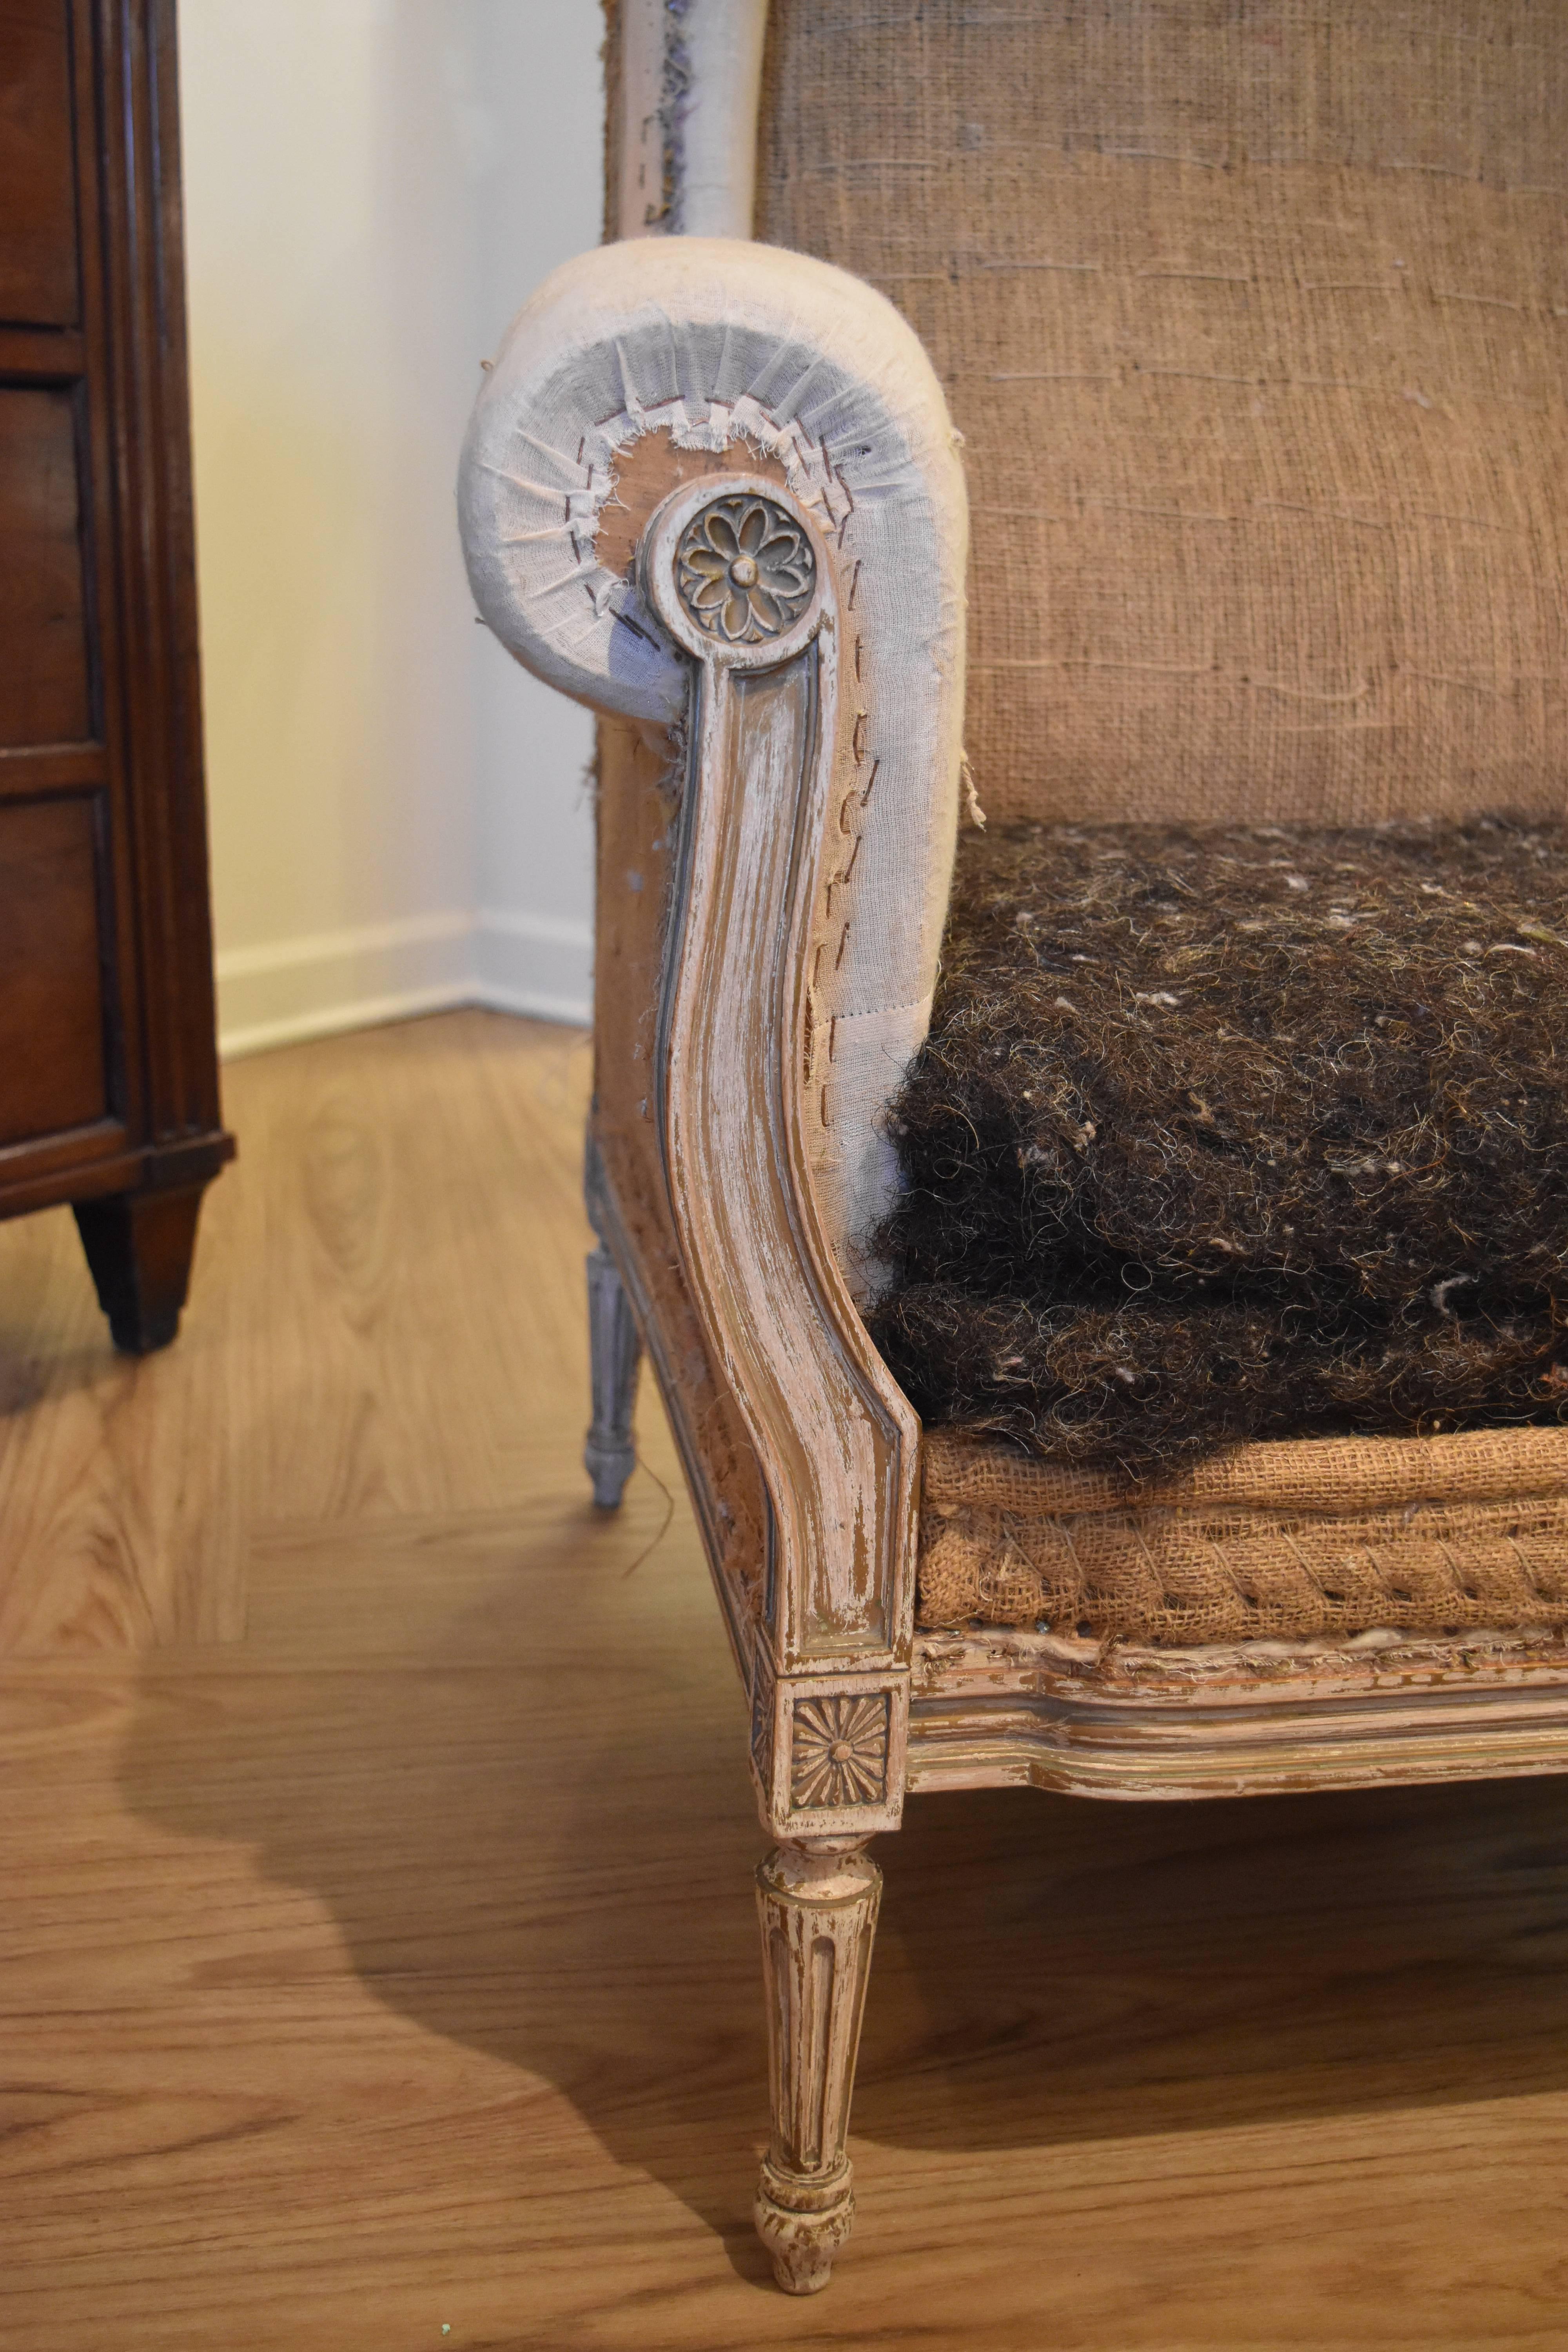 This pair of 19th century French wingback chairs have a lovely painted cream finish. As shown in the photos, the chair seat cushions still have the original horse hair covering and need to be upholstered.